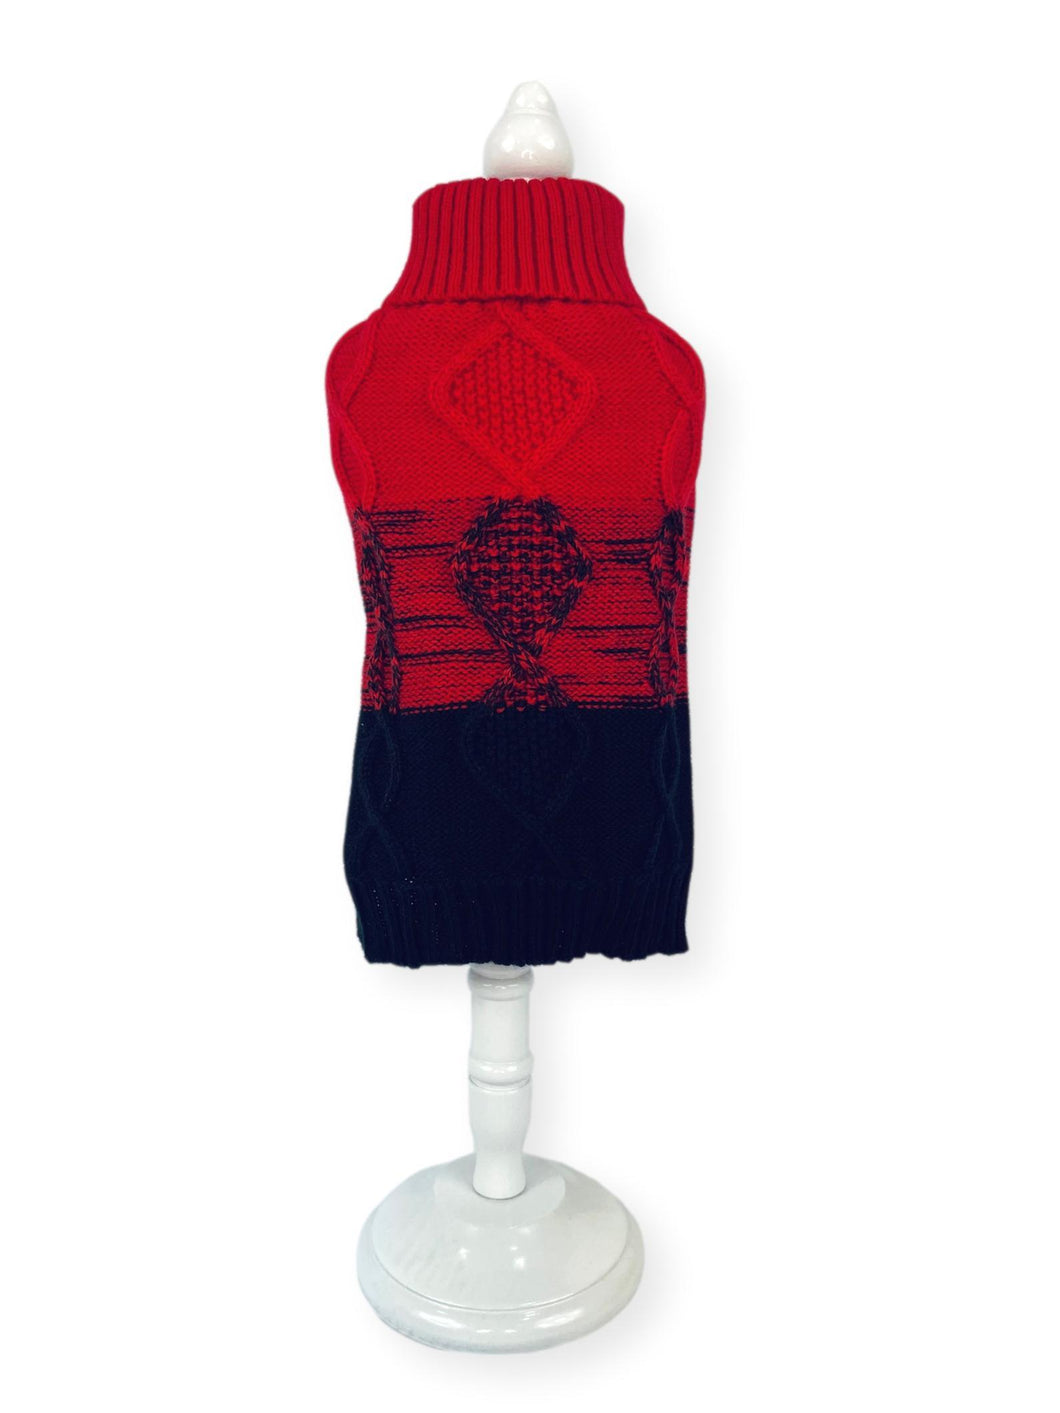 Red and Black Ombre Cable Knit Dog Sweater Sweaters Cara Mia Dogwear 